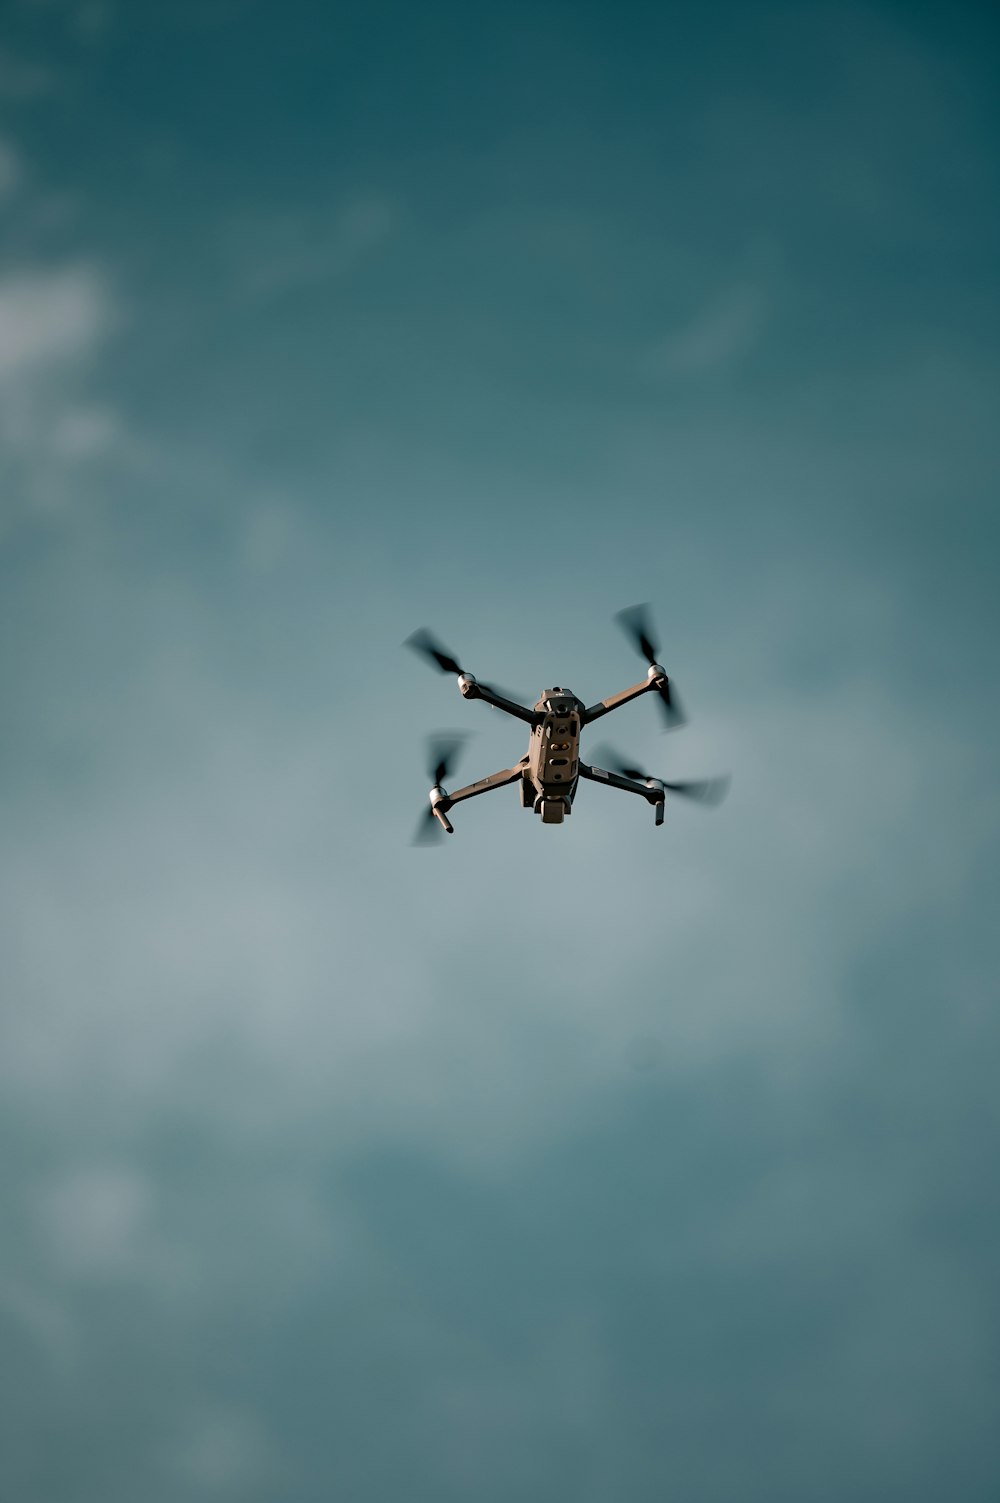 Mavic Air 2 Pictures  Download Free Images on Unsplash